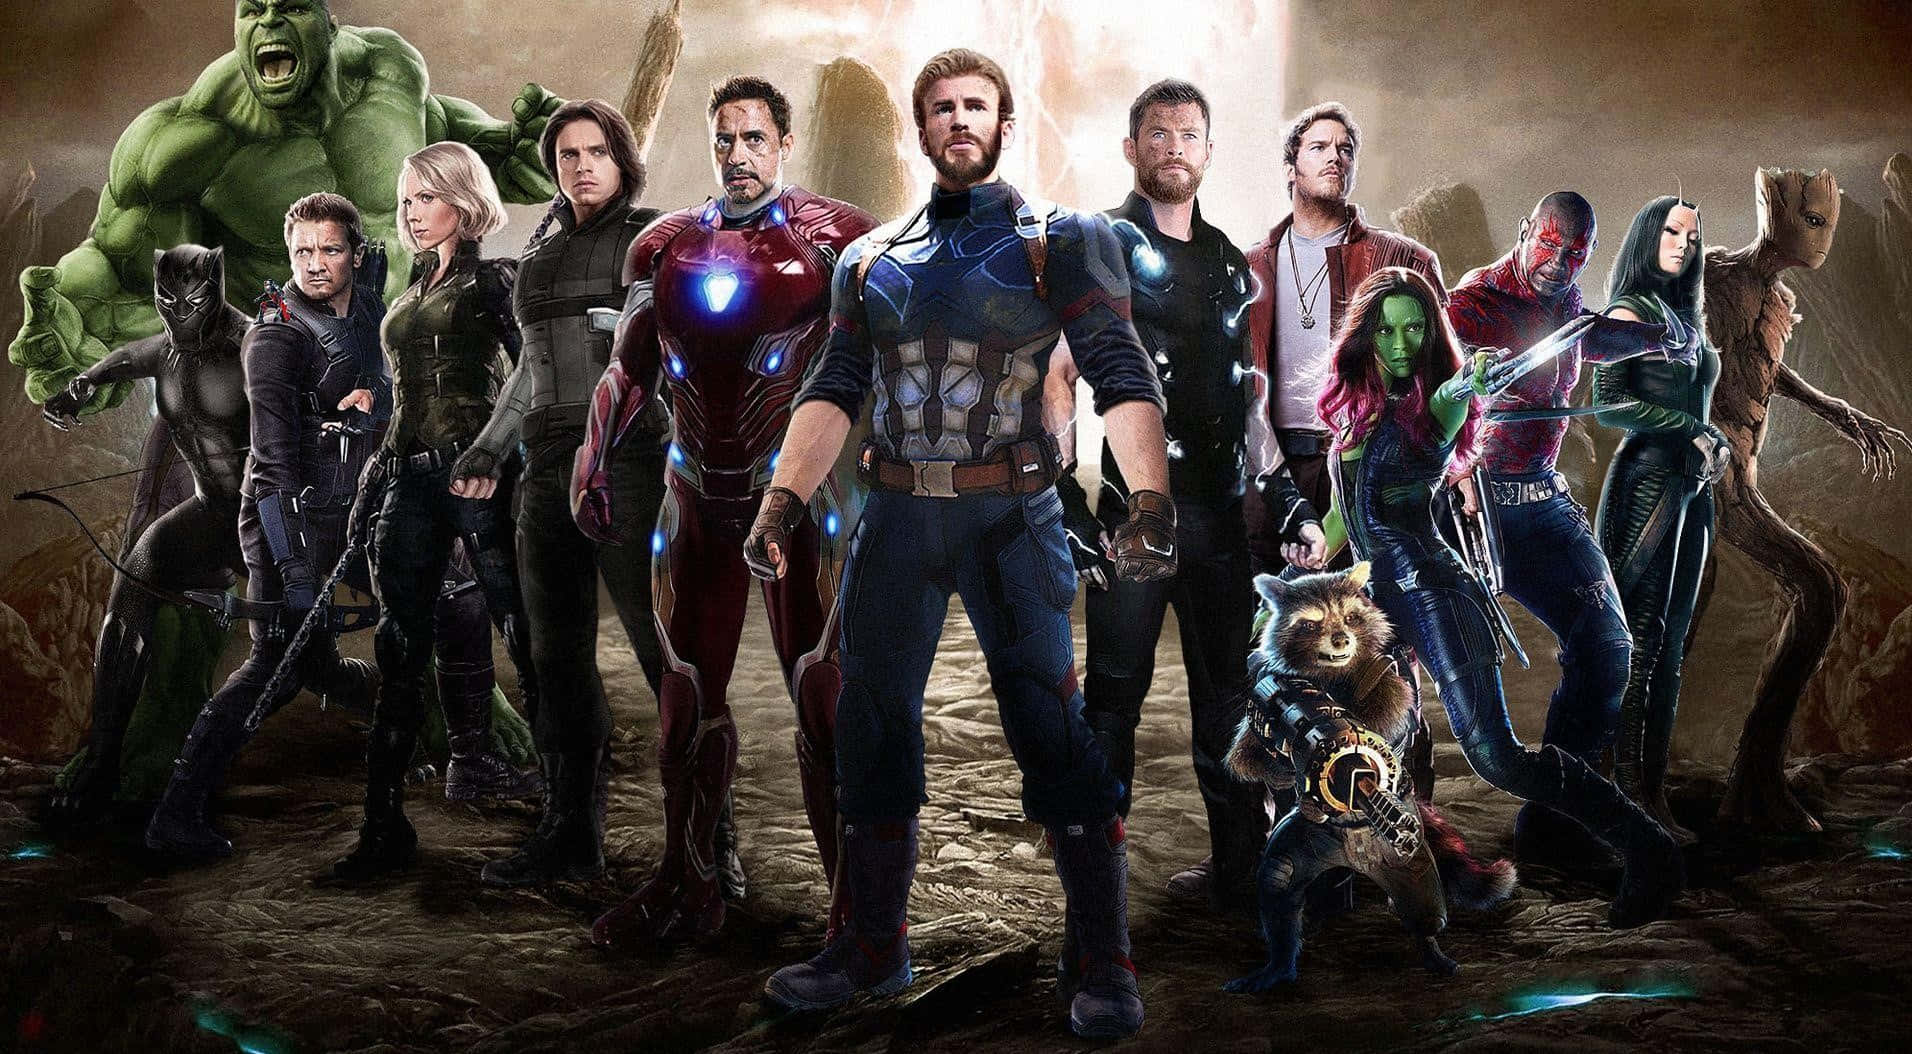 The Avengers Unite - Earth's Mightiest Heroes